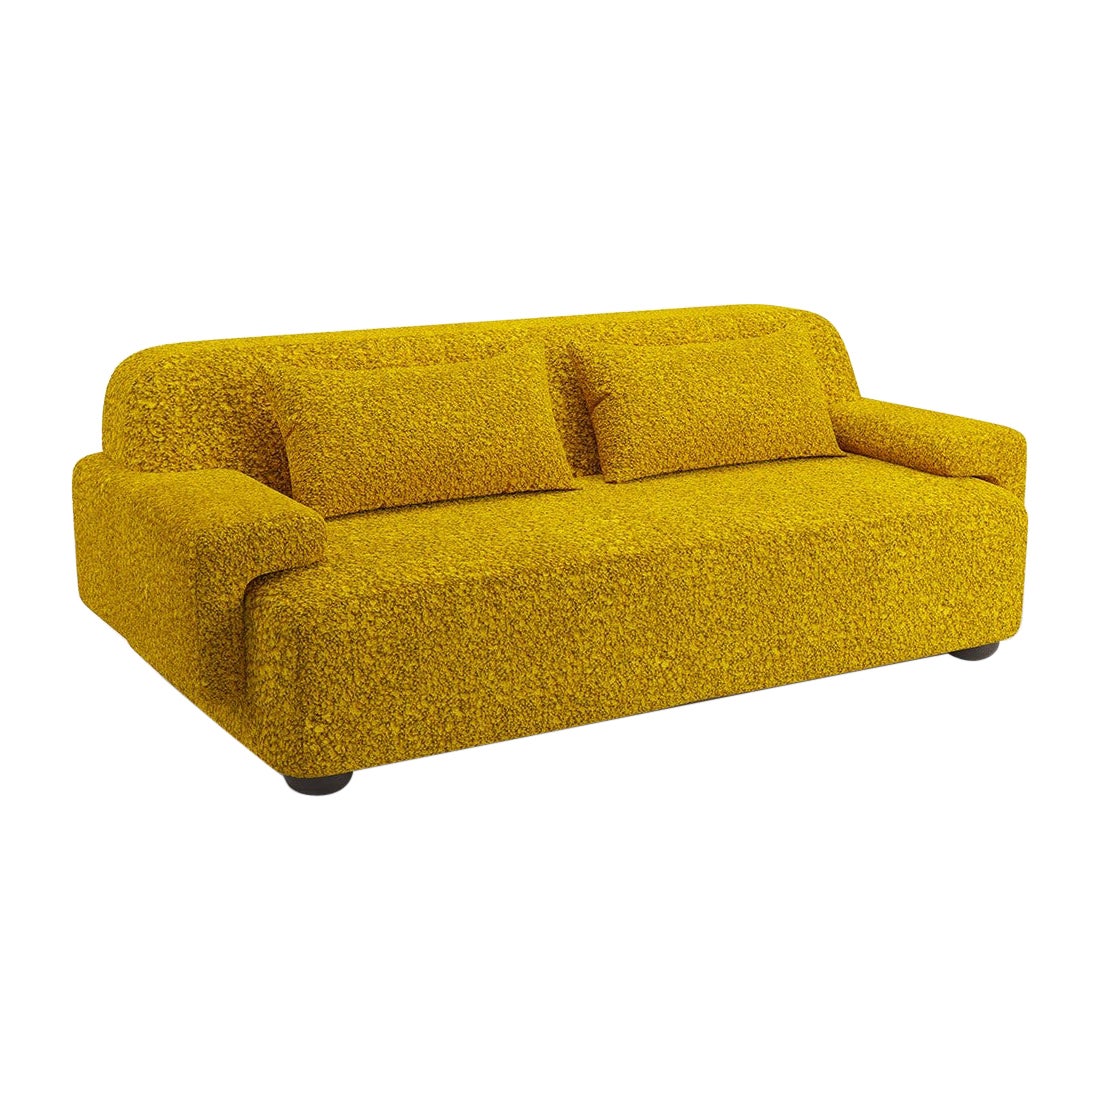 Popus Editions Lena 2.5 Seater Sofa in Amber Athena Loop Yarn Upholstery